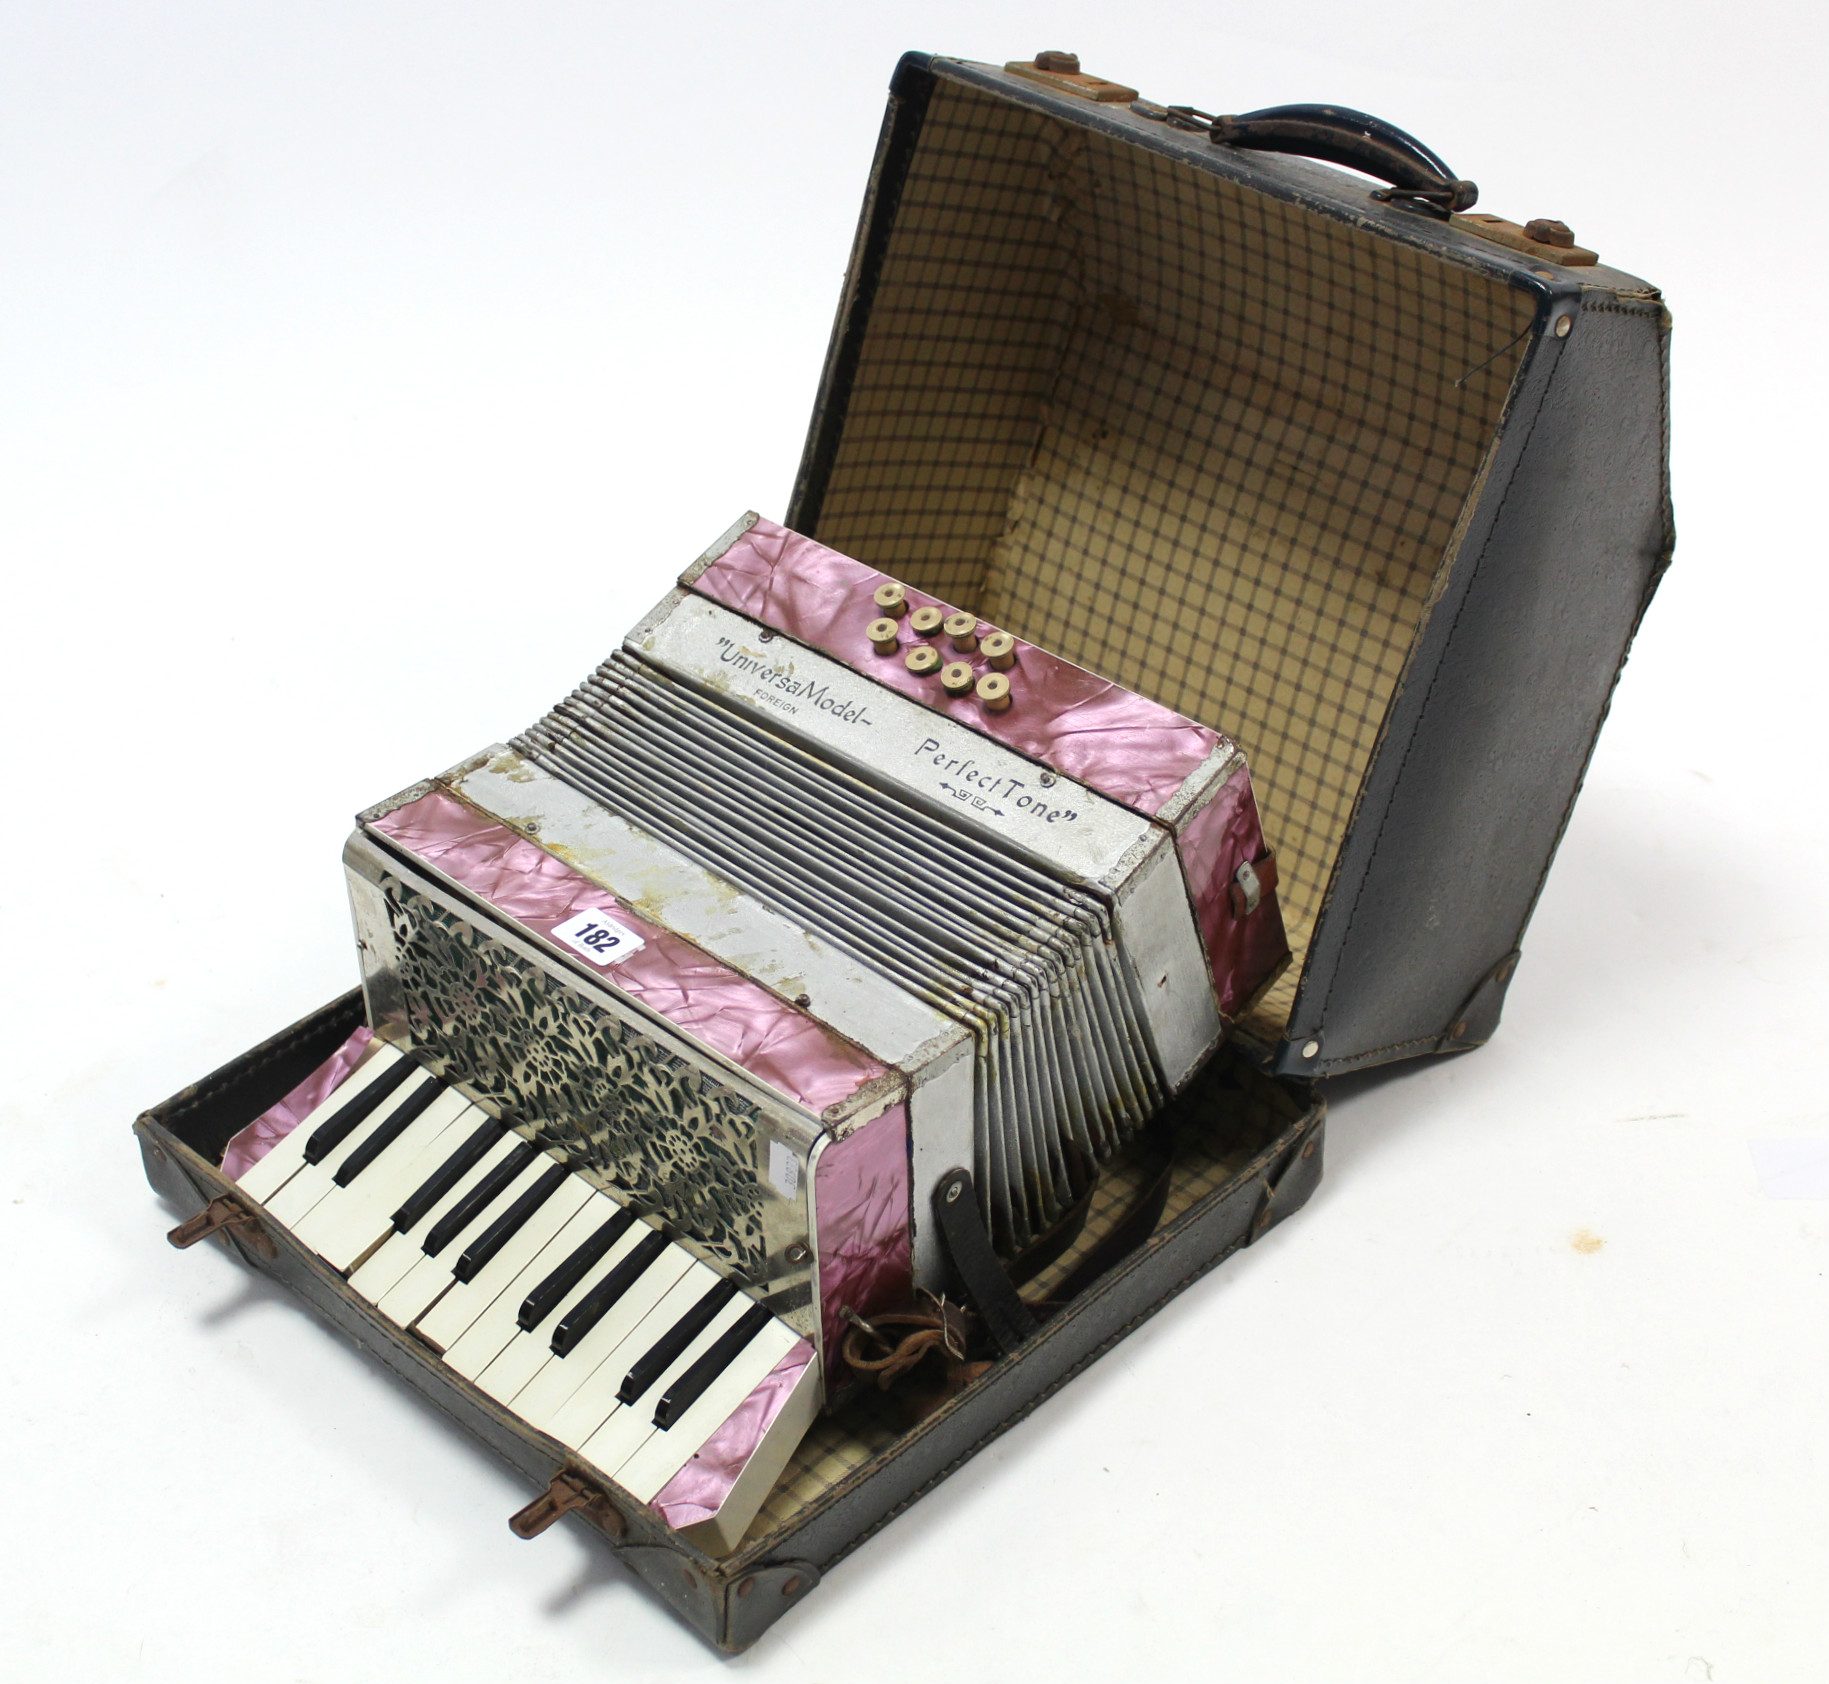 A Perfect Tone “Universal” model piano accordion, with fibre covered travelling case.